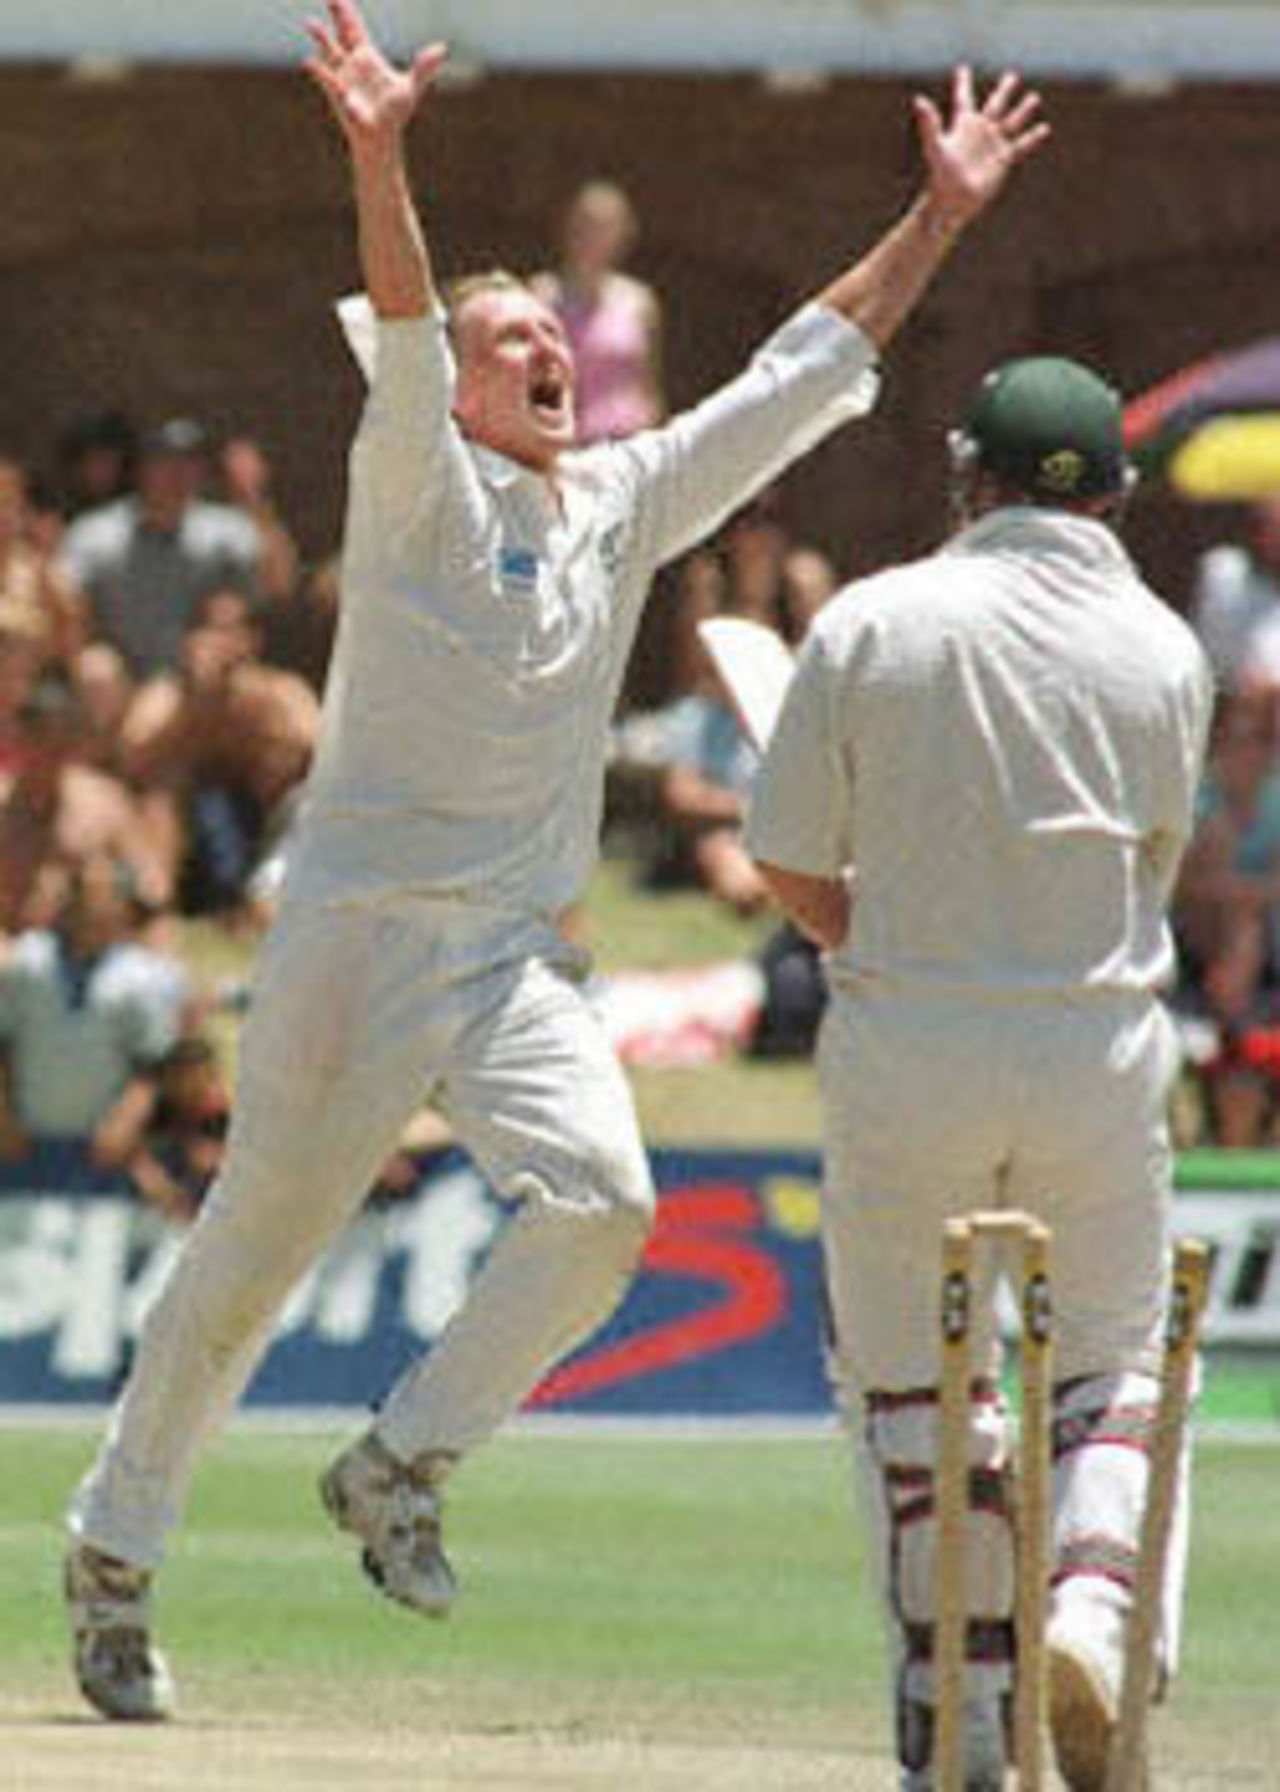 Kerry Walmsley celebrates after knocking over Daryll Cullinan's offstump, New Zealand in South Africa, 2000/01, 2nd Test, South Africa v New Zealand, Crusaders Ground, St George's Park, Port Elizabeth, 30Nov-04Dec 2000 (Day 4).